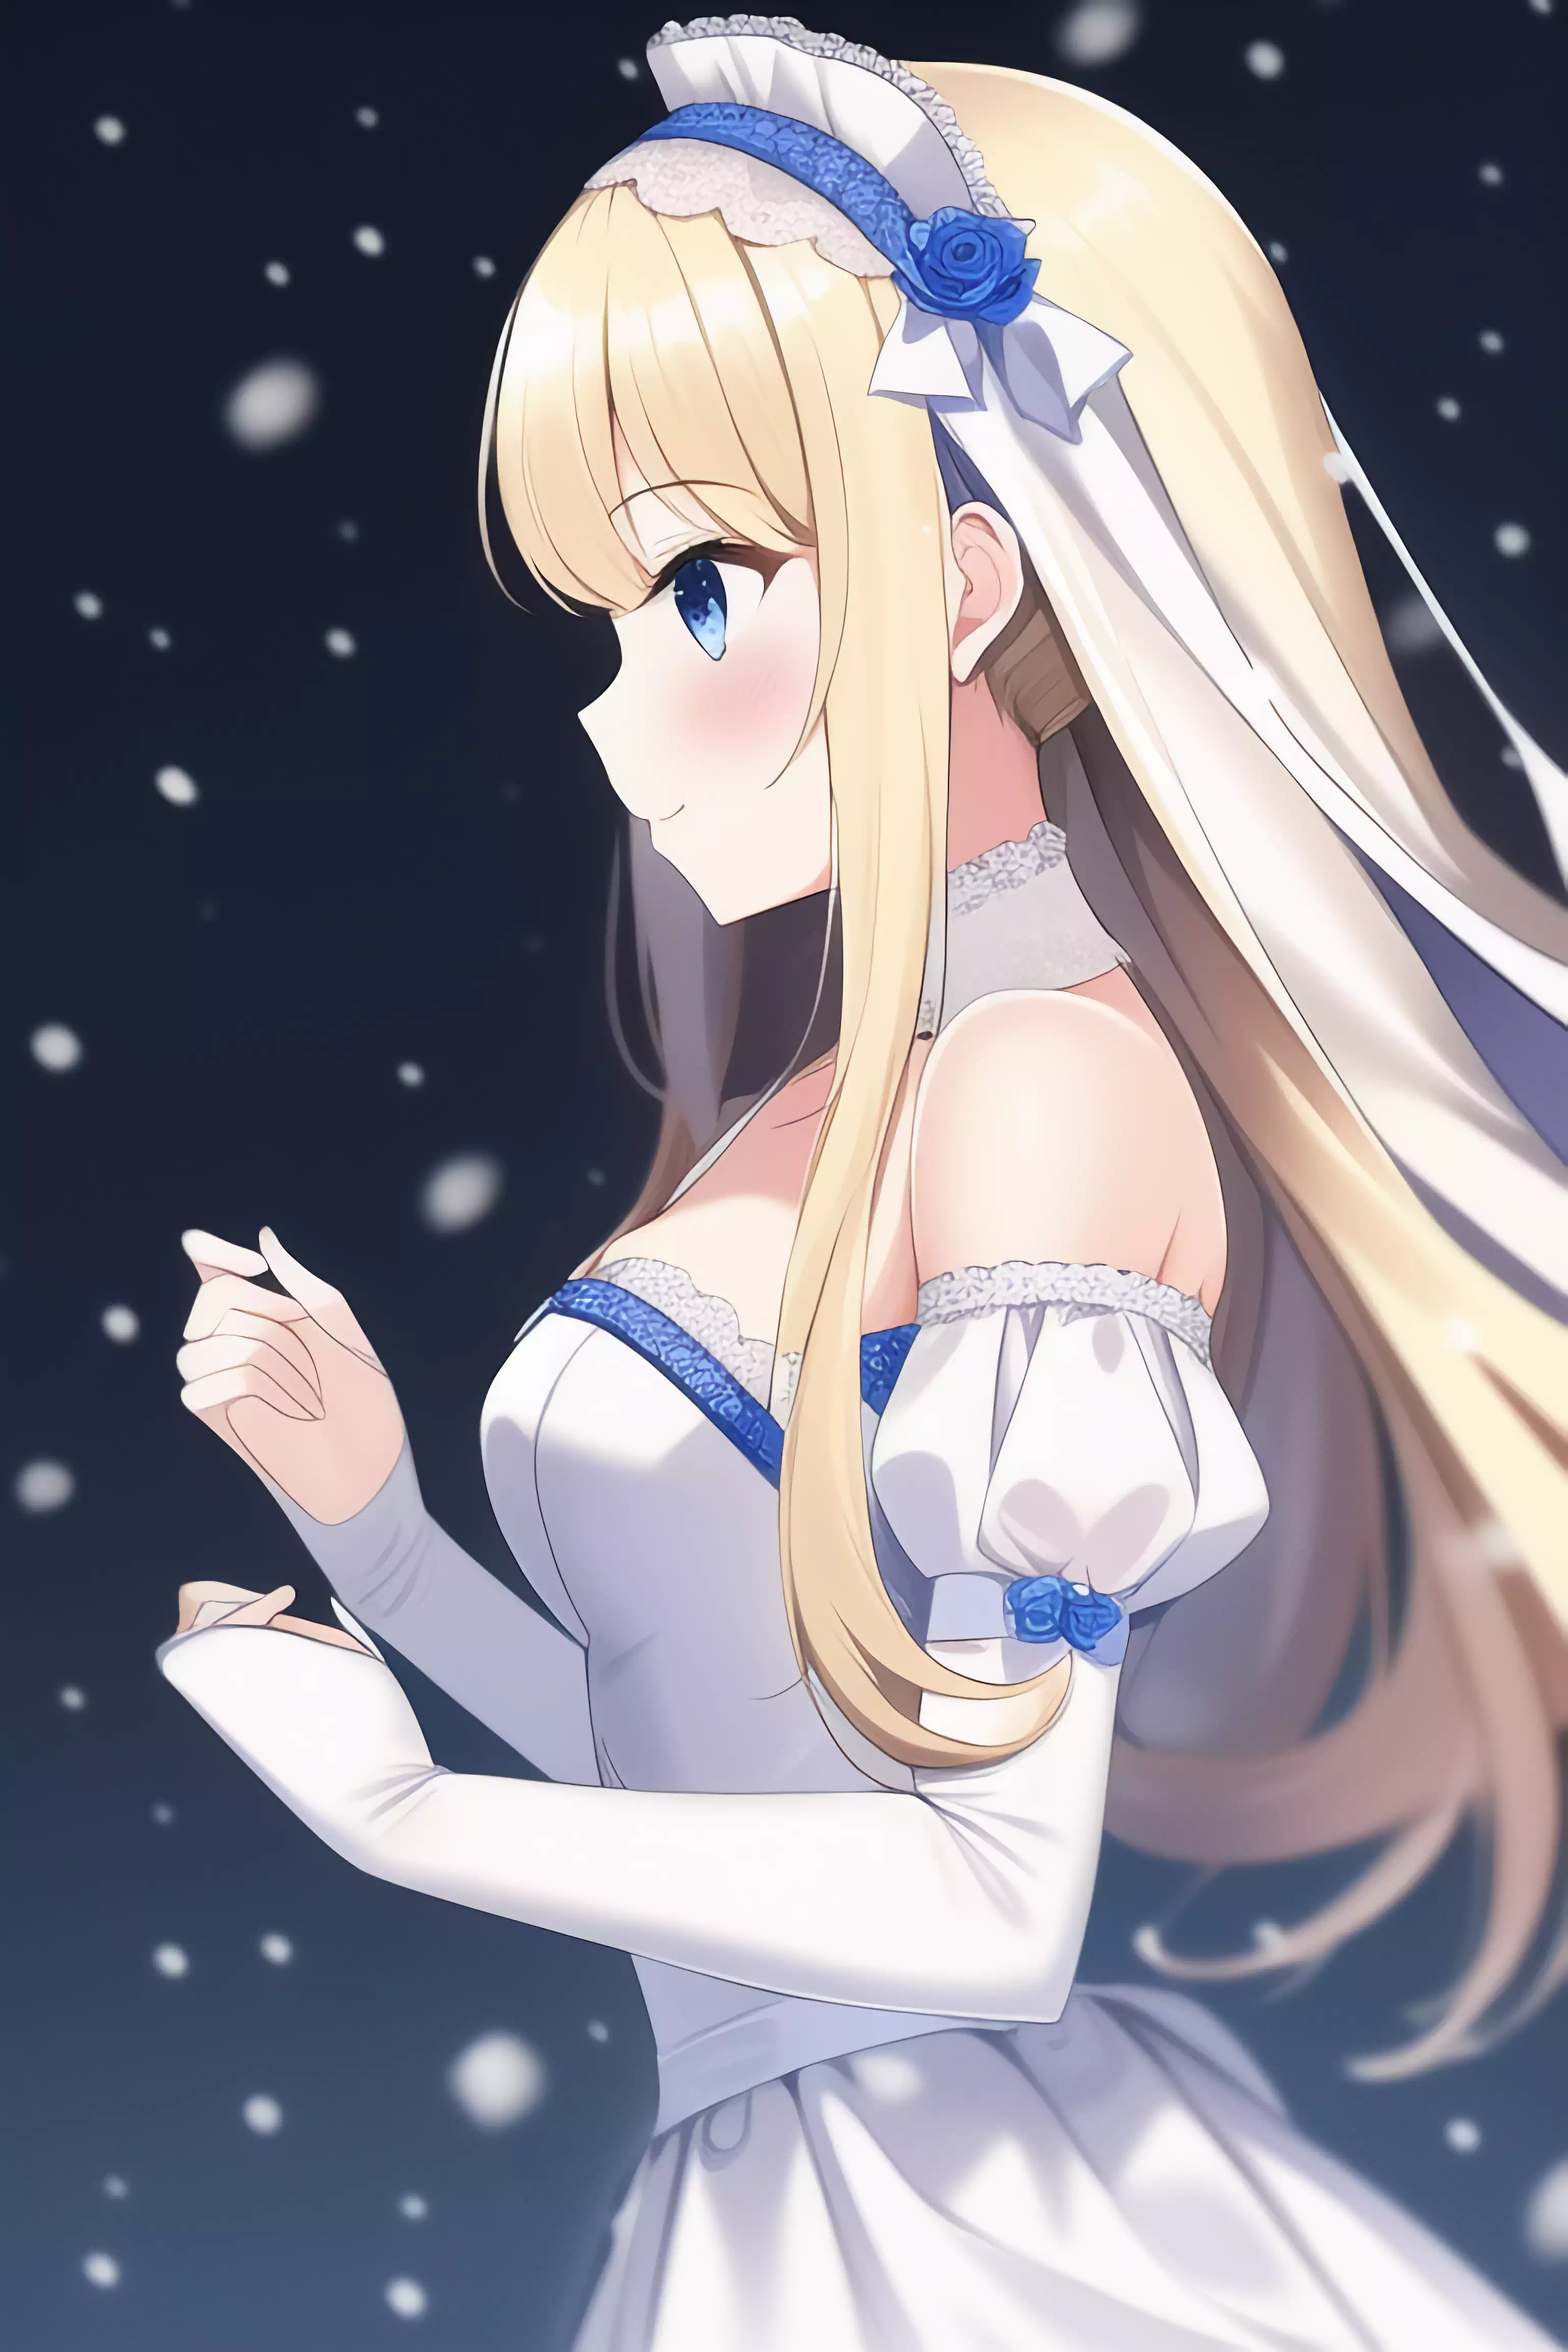 A blonde girl in the snow